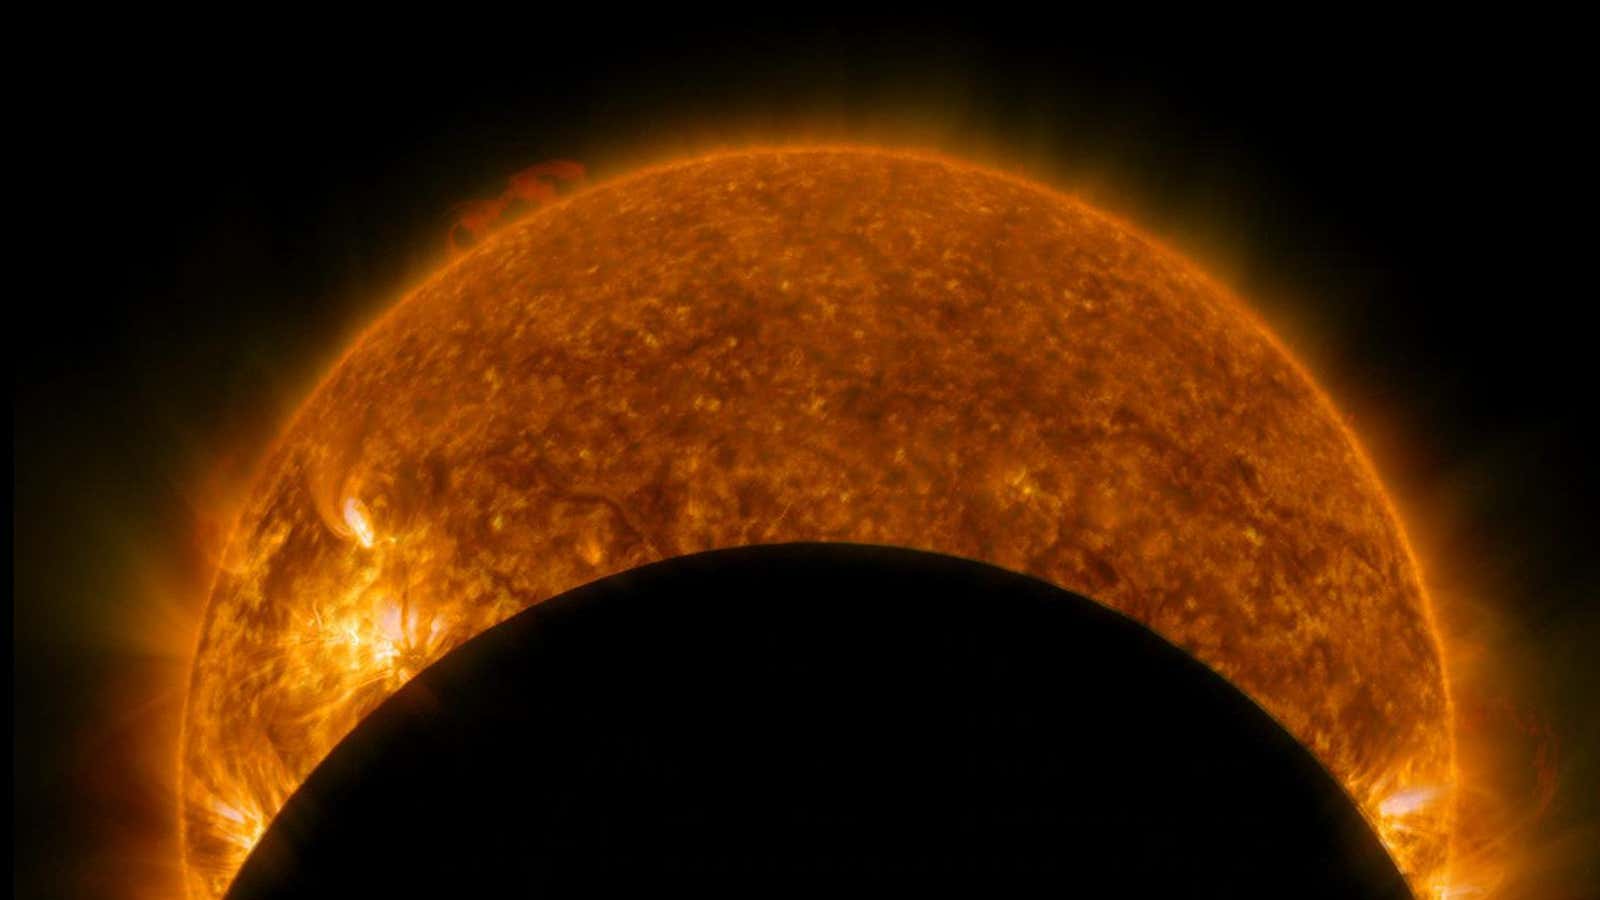 NASA’s Solar Dynamics Observatory captured this ultraviolet image of the moon eclipsing the sun on Jan. 31, 2014.